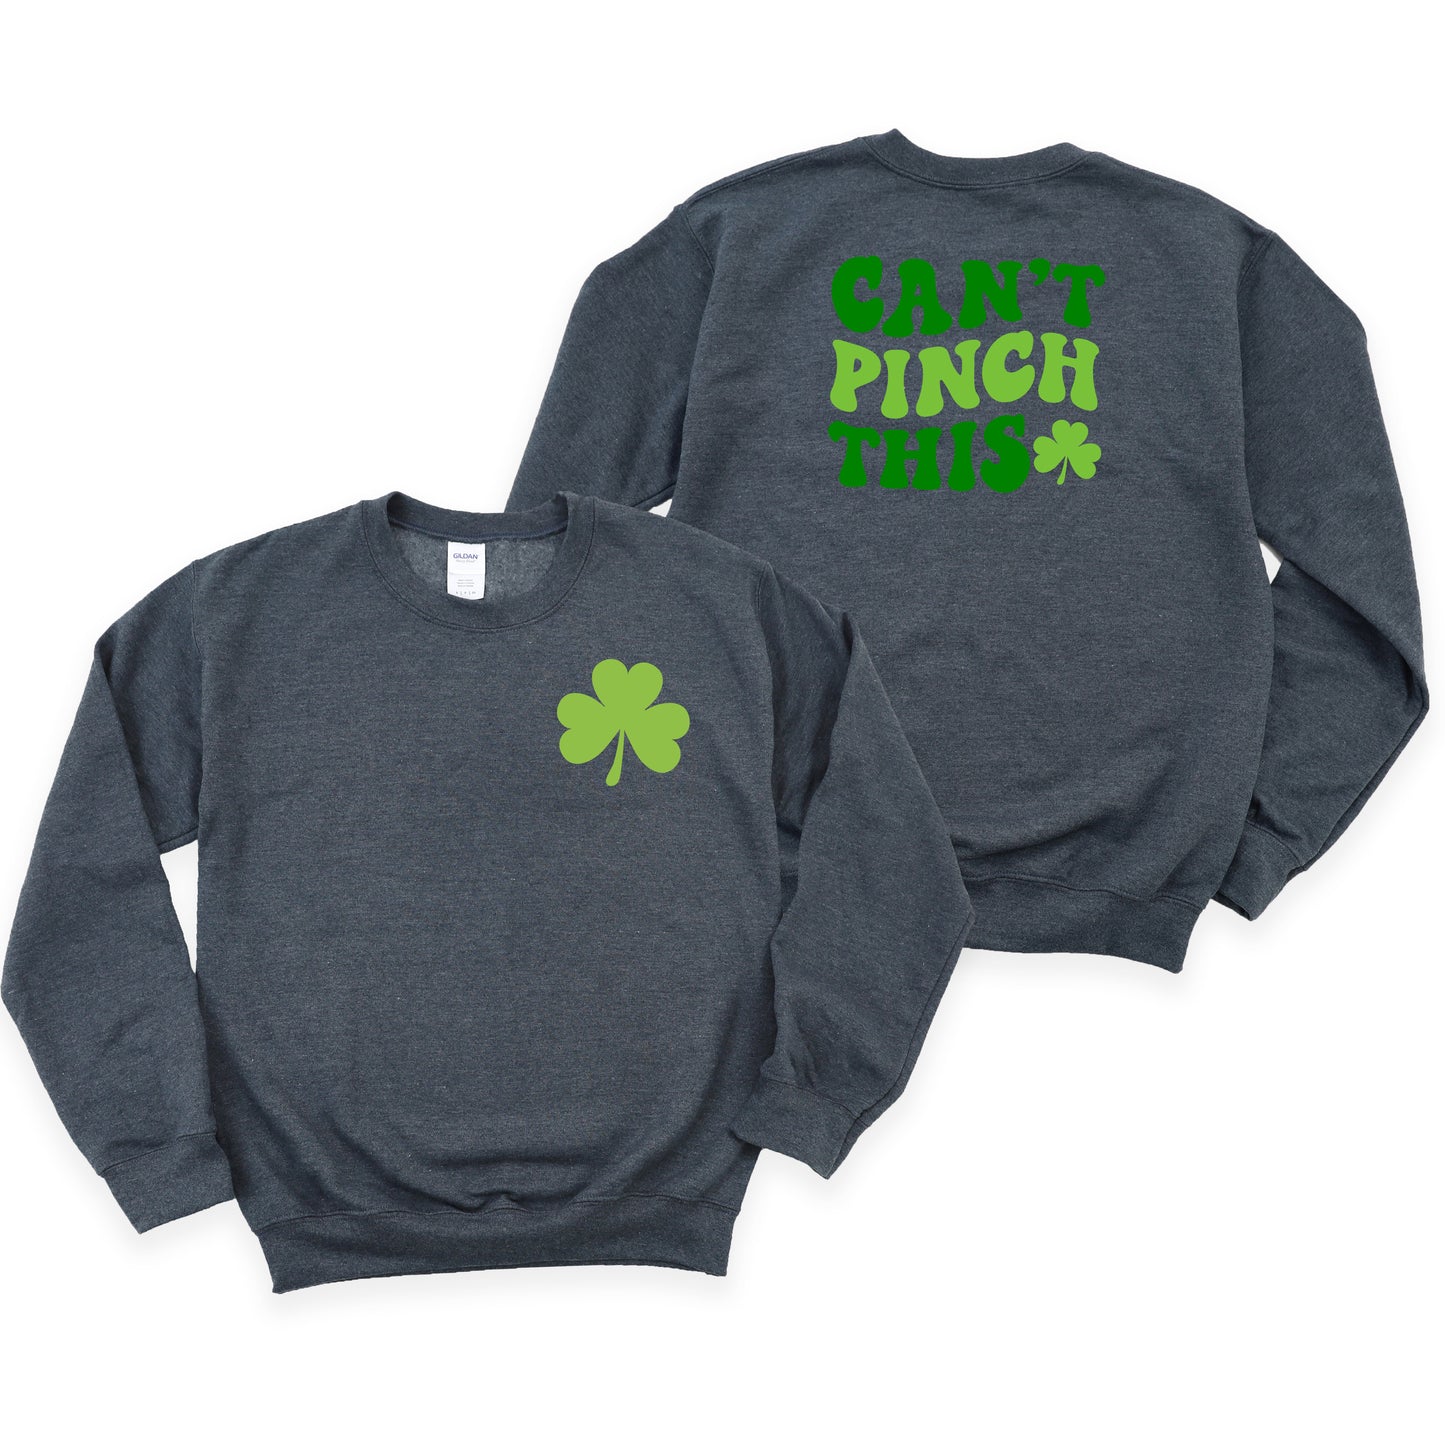 Can't Pinch This | Front and Back Sweatshirt